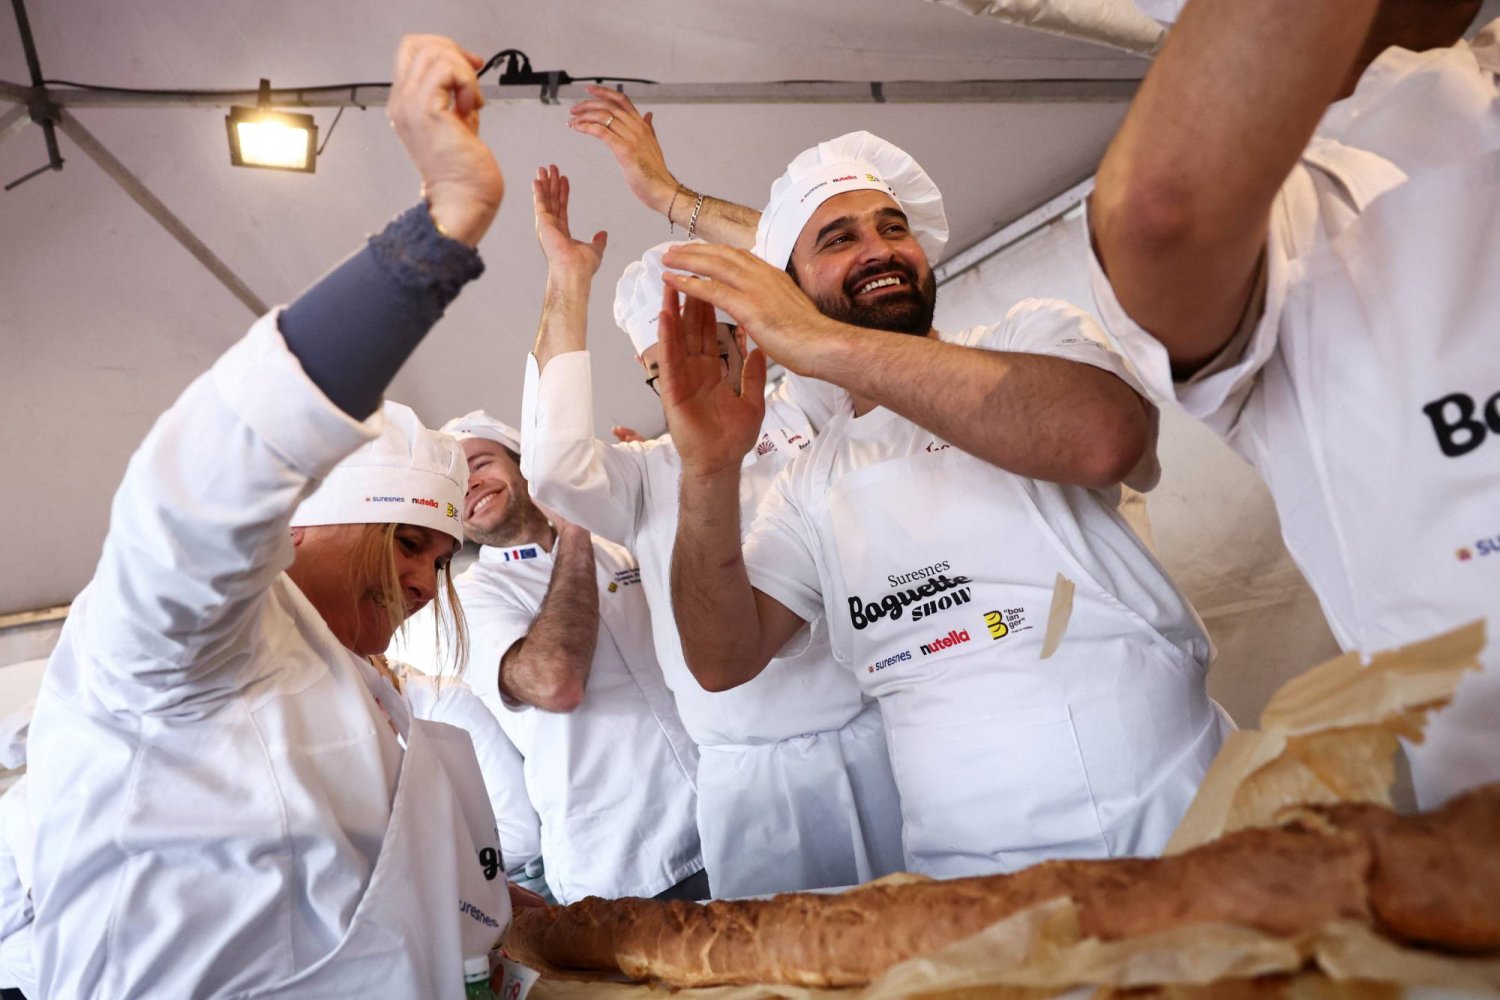 French bakers react after having finished cooking the baguette in an attempt to beat the world record for the longest baguette during the Suresnes Baguette Show in Suresnes near Paris, France, May 5, 2024. REUTERS/Stephanie Lecocq